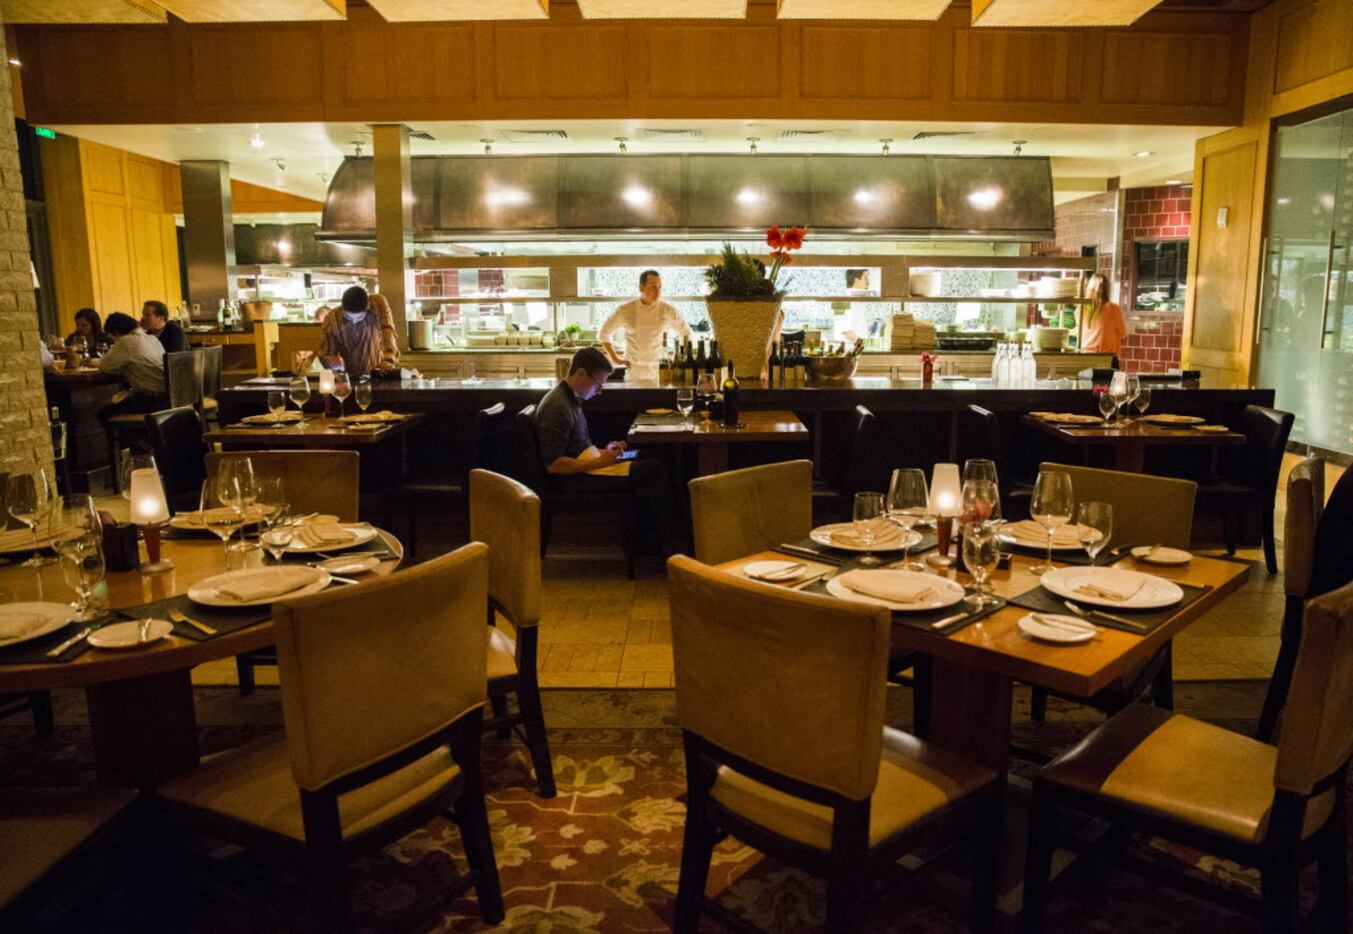 Dean's Kitchen is the more casual dining room at Fearing's.